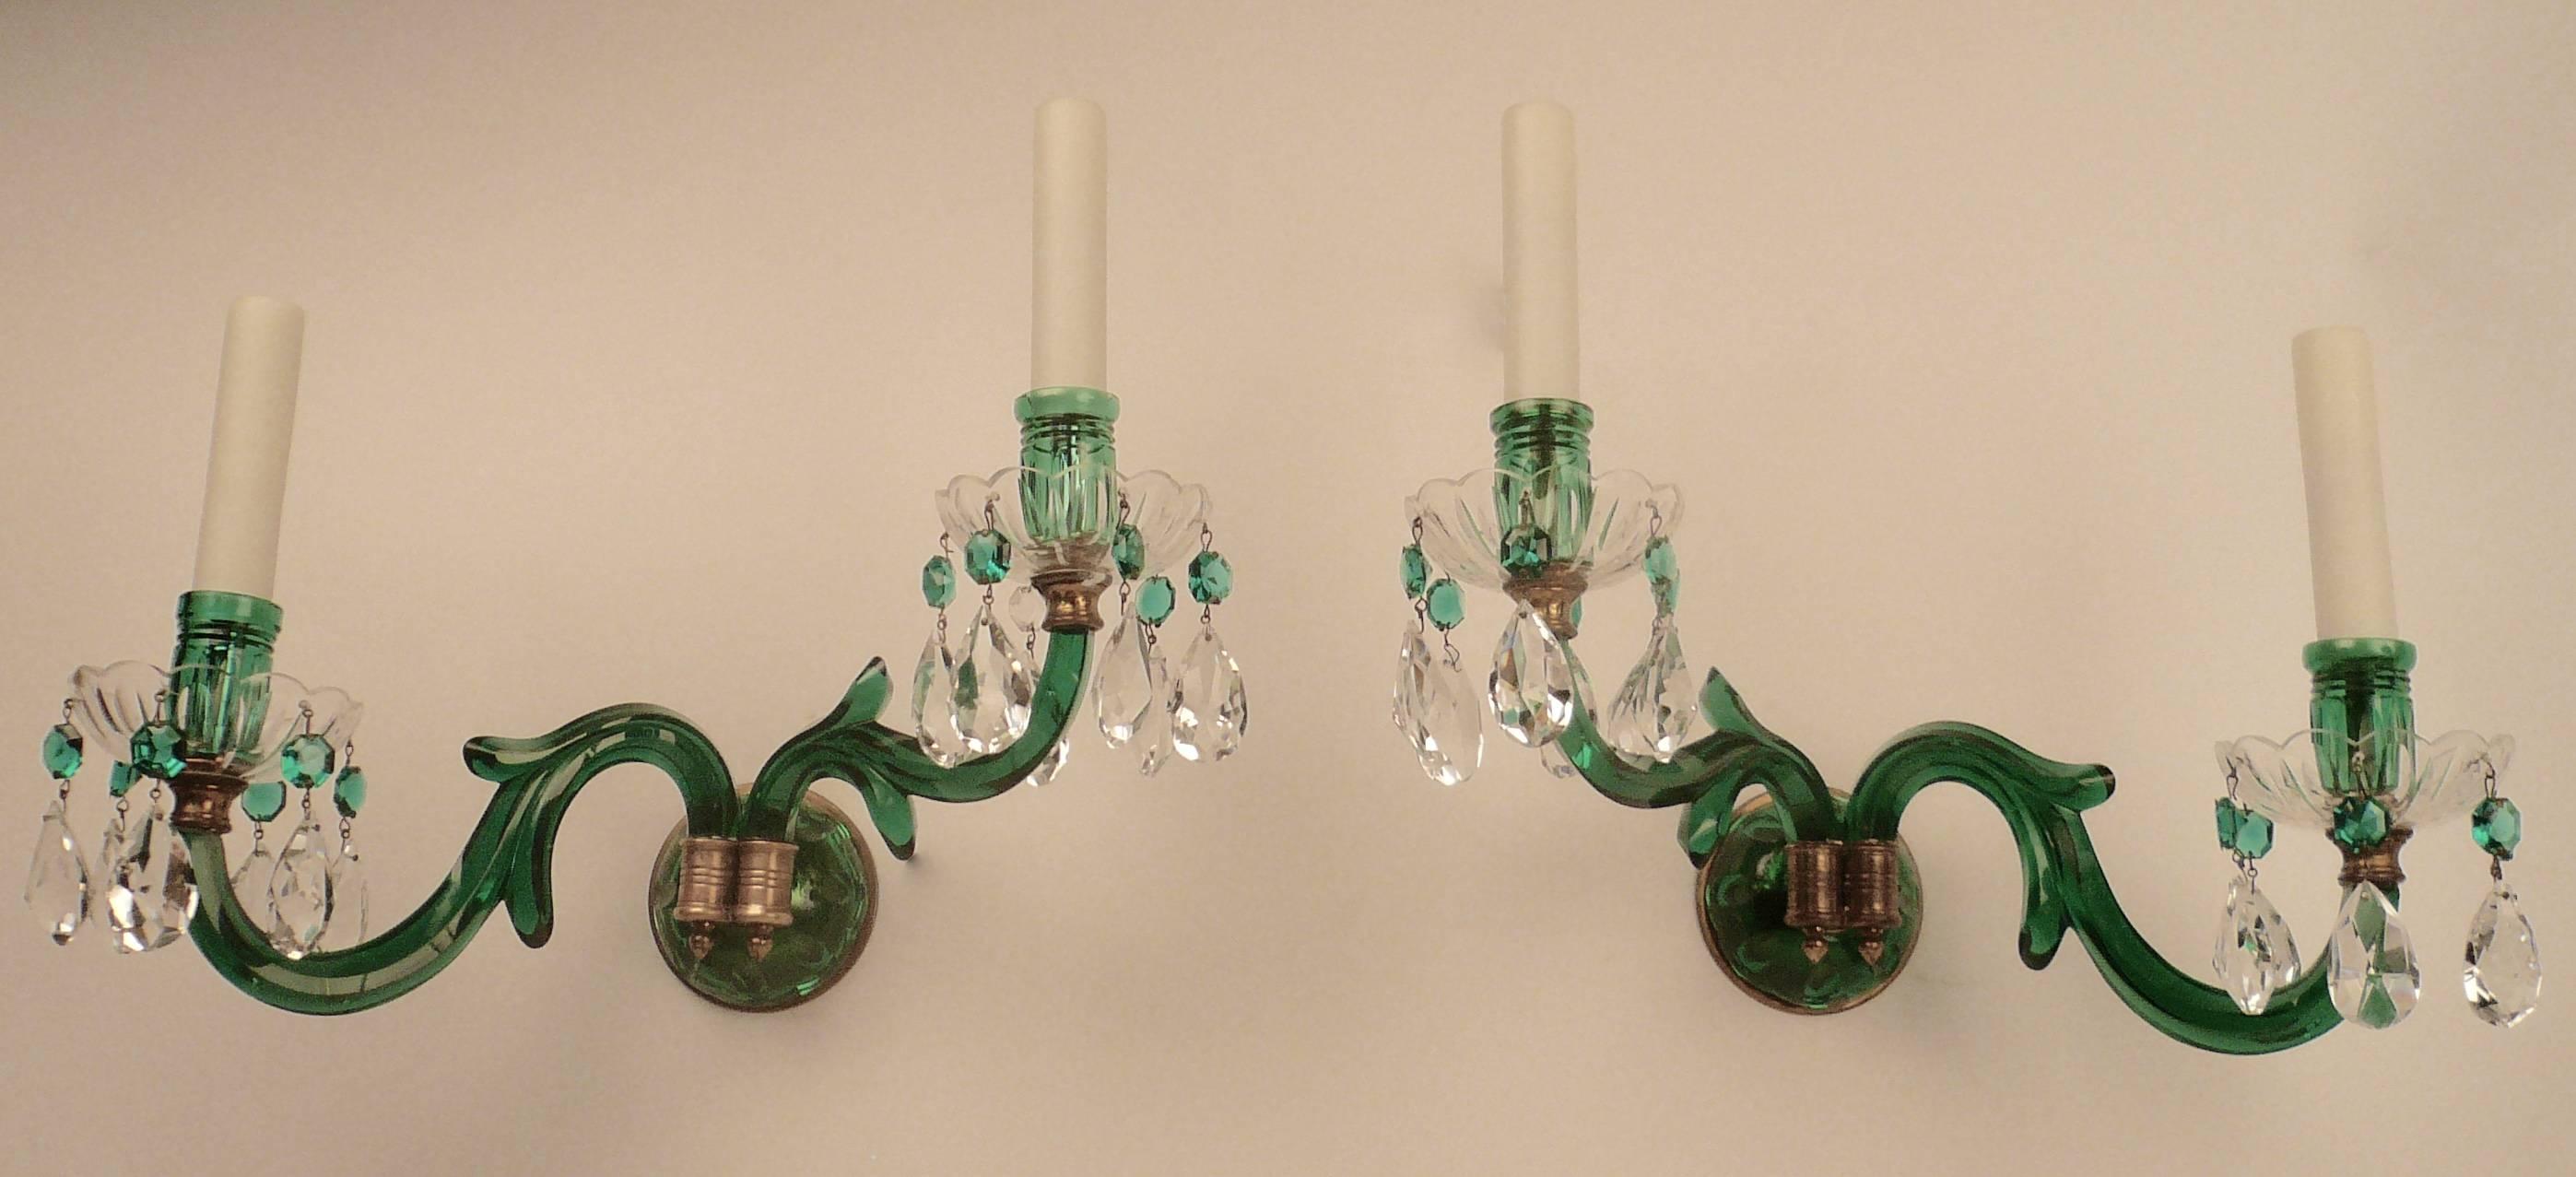 Pair of English Mid-19th Century Emerald Green Cut Crystal Sconces For Sale 4